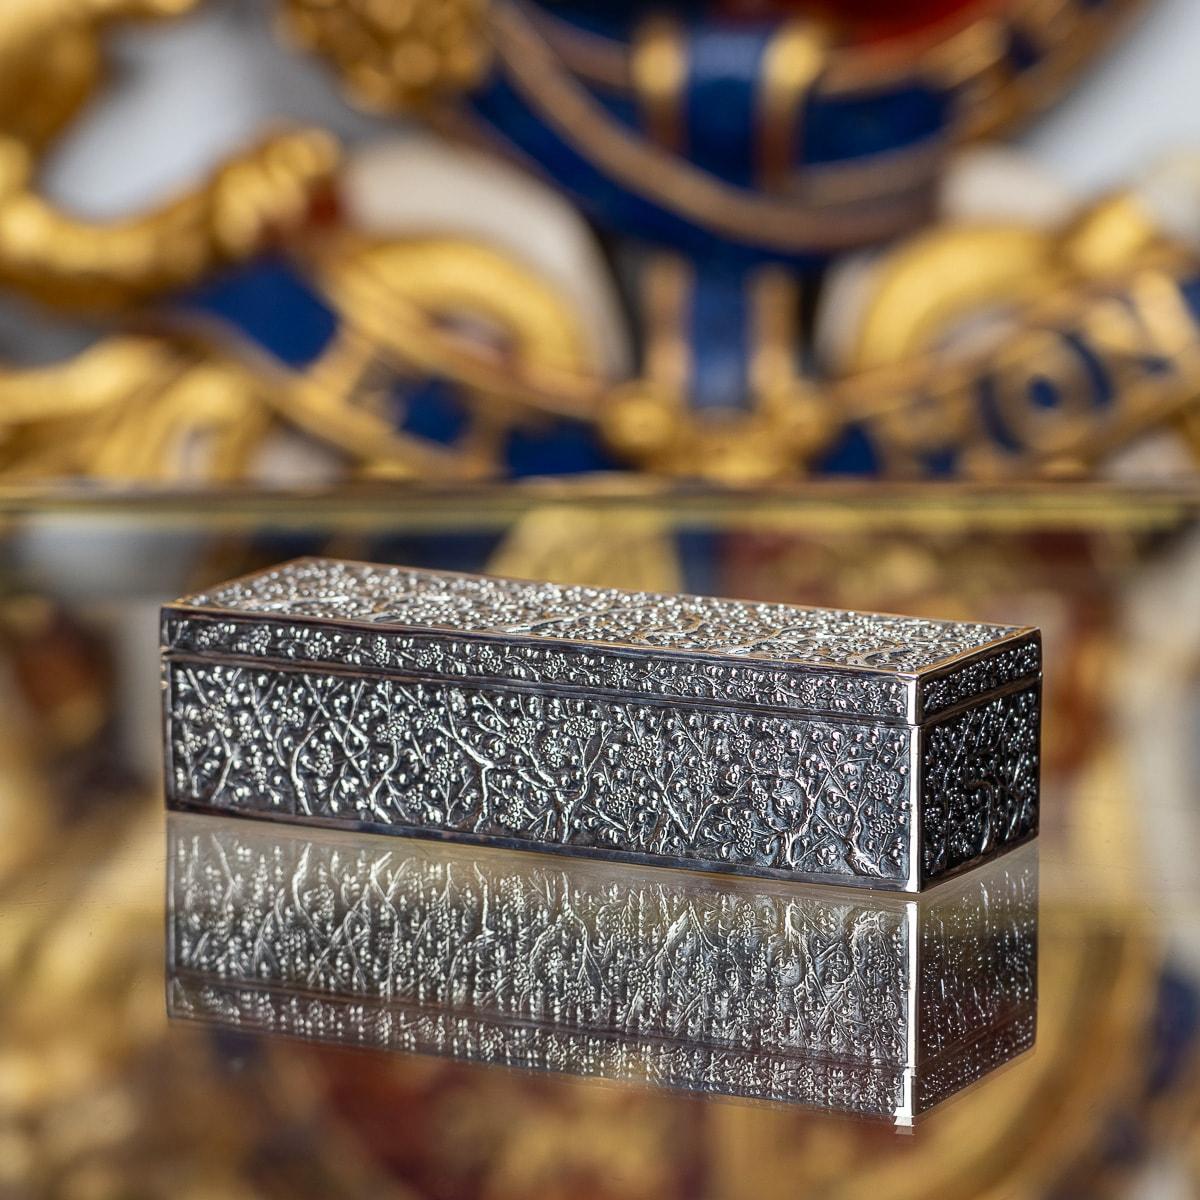 Antique 19th Century Chinese export solid silver box, of elongated rectangular form, decorated with stunning repousse decoration cherry blossom pattern. Hallmarked Chinese Export silver (acid tested shows a 900+ silver standard), Artisan mark Liang